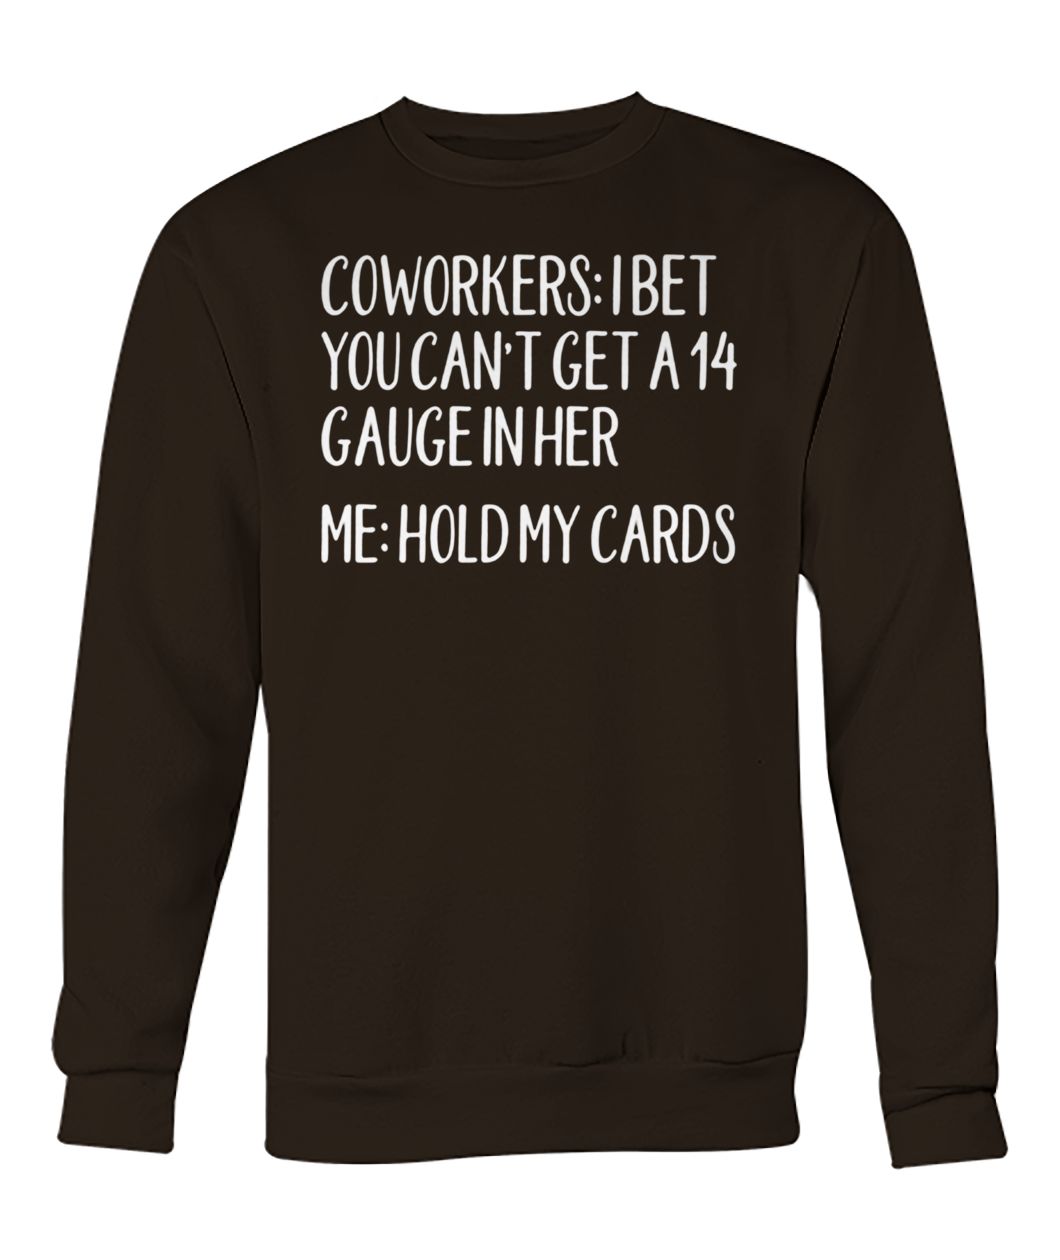 Coworkers I bet you can't get a 14 gauge in her me hold my cards crew neck sweatshirt